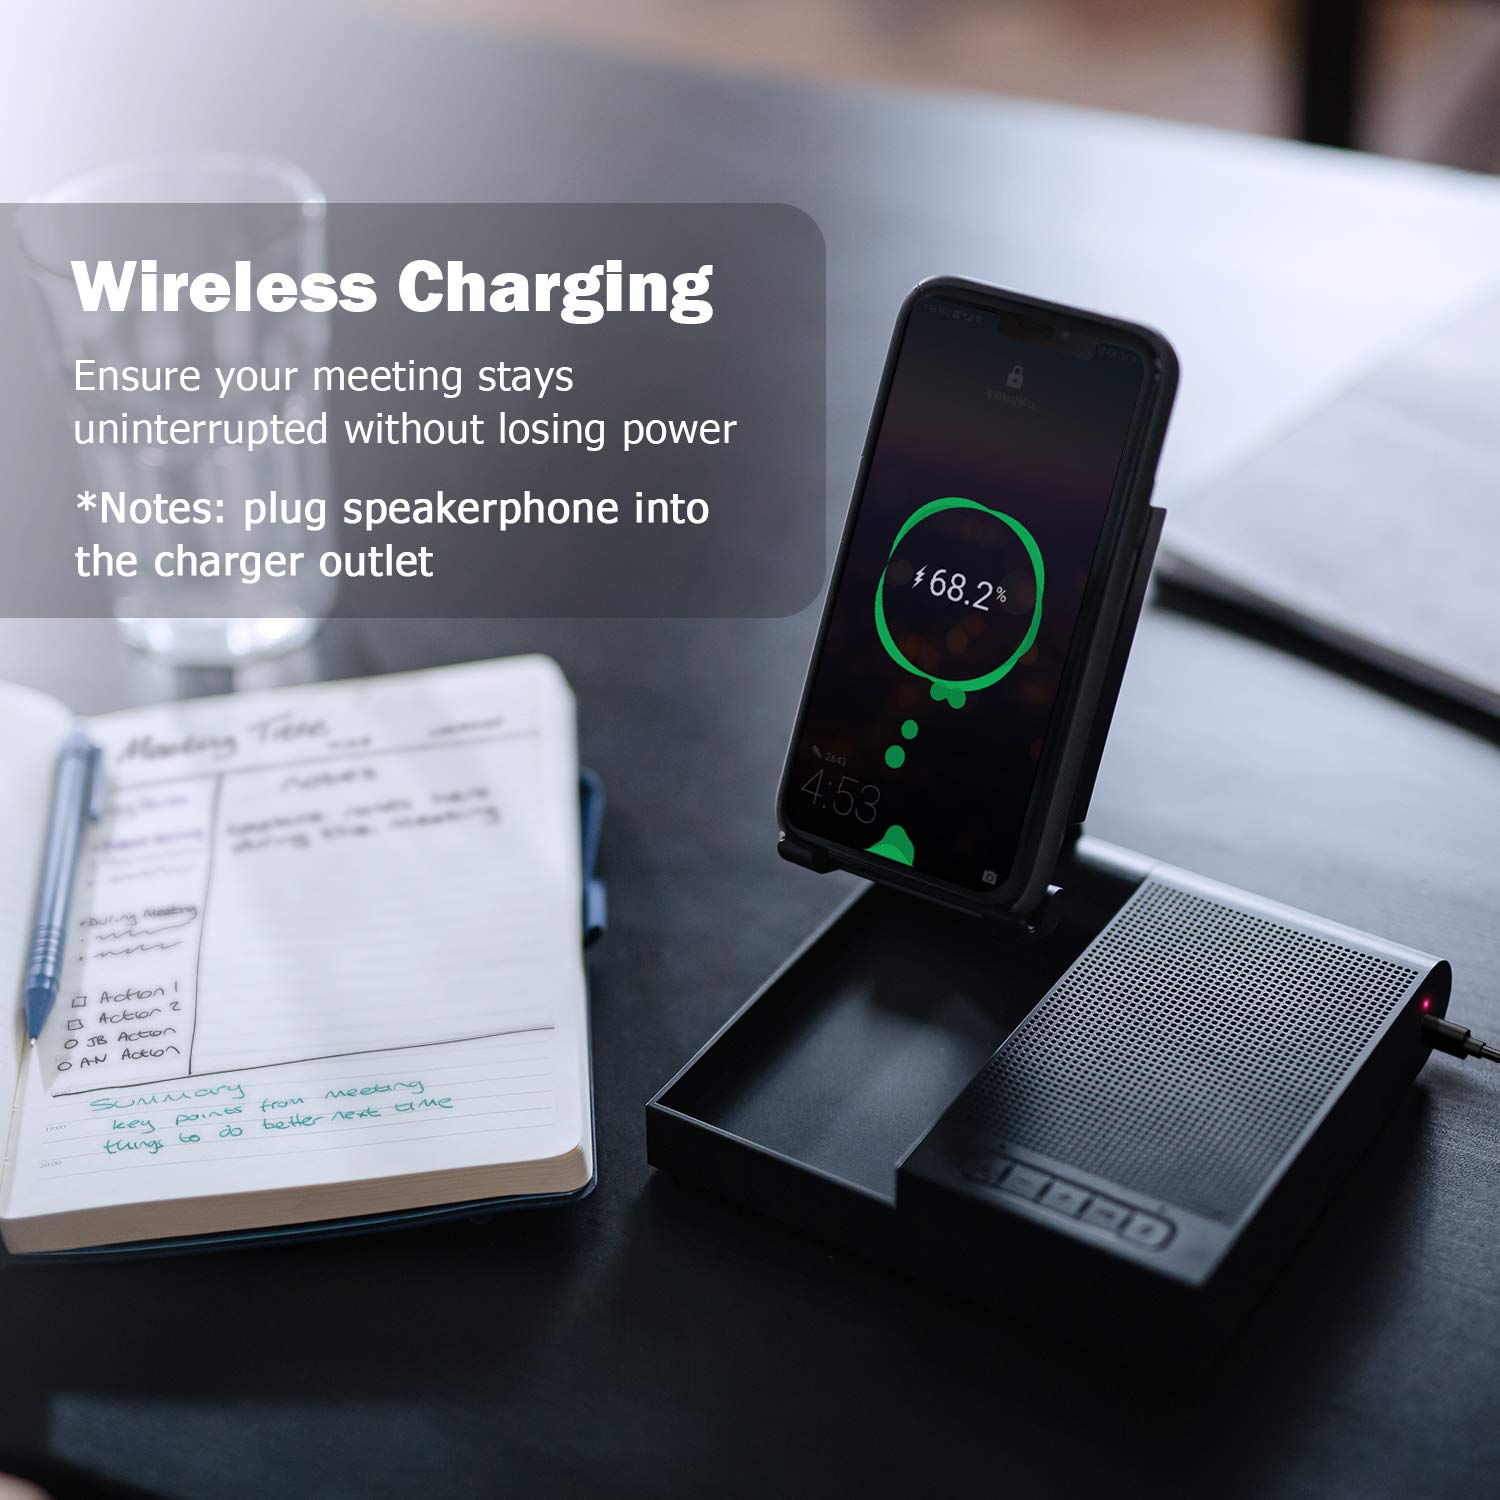 Bluetooth USB Speakerphone, Wireless Speaker with Digital Signal Processing Noise Reduction, Enhanced Voice Pickup, Phone Stand, 10W Wireless Charger, Conference Speaker for Phone, Tablet, Home Office